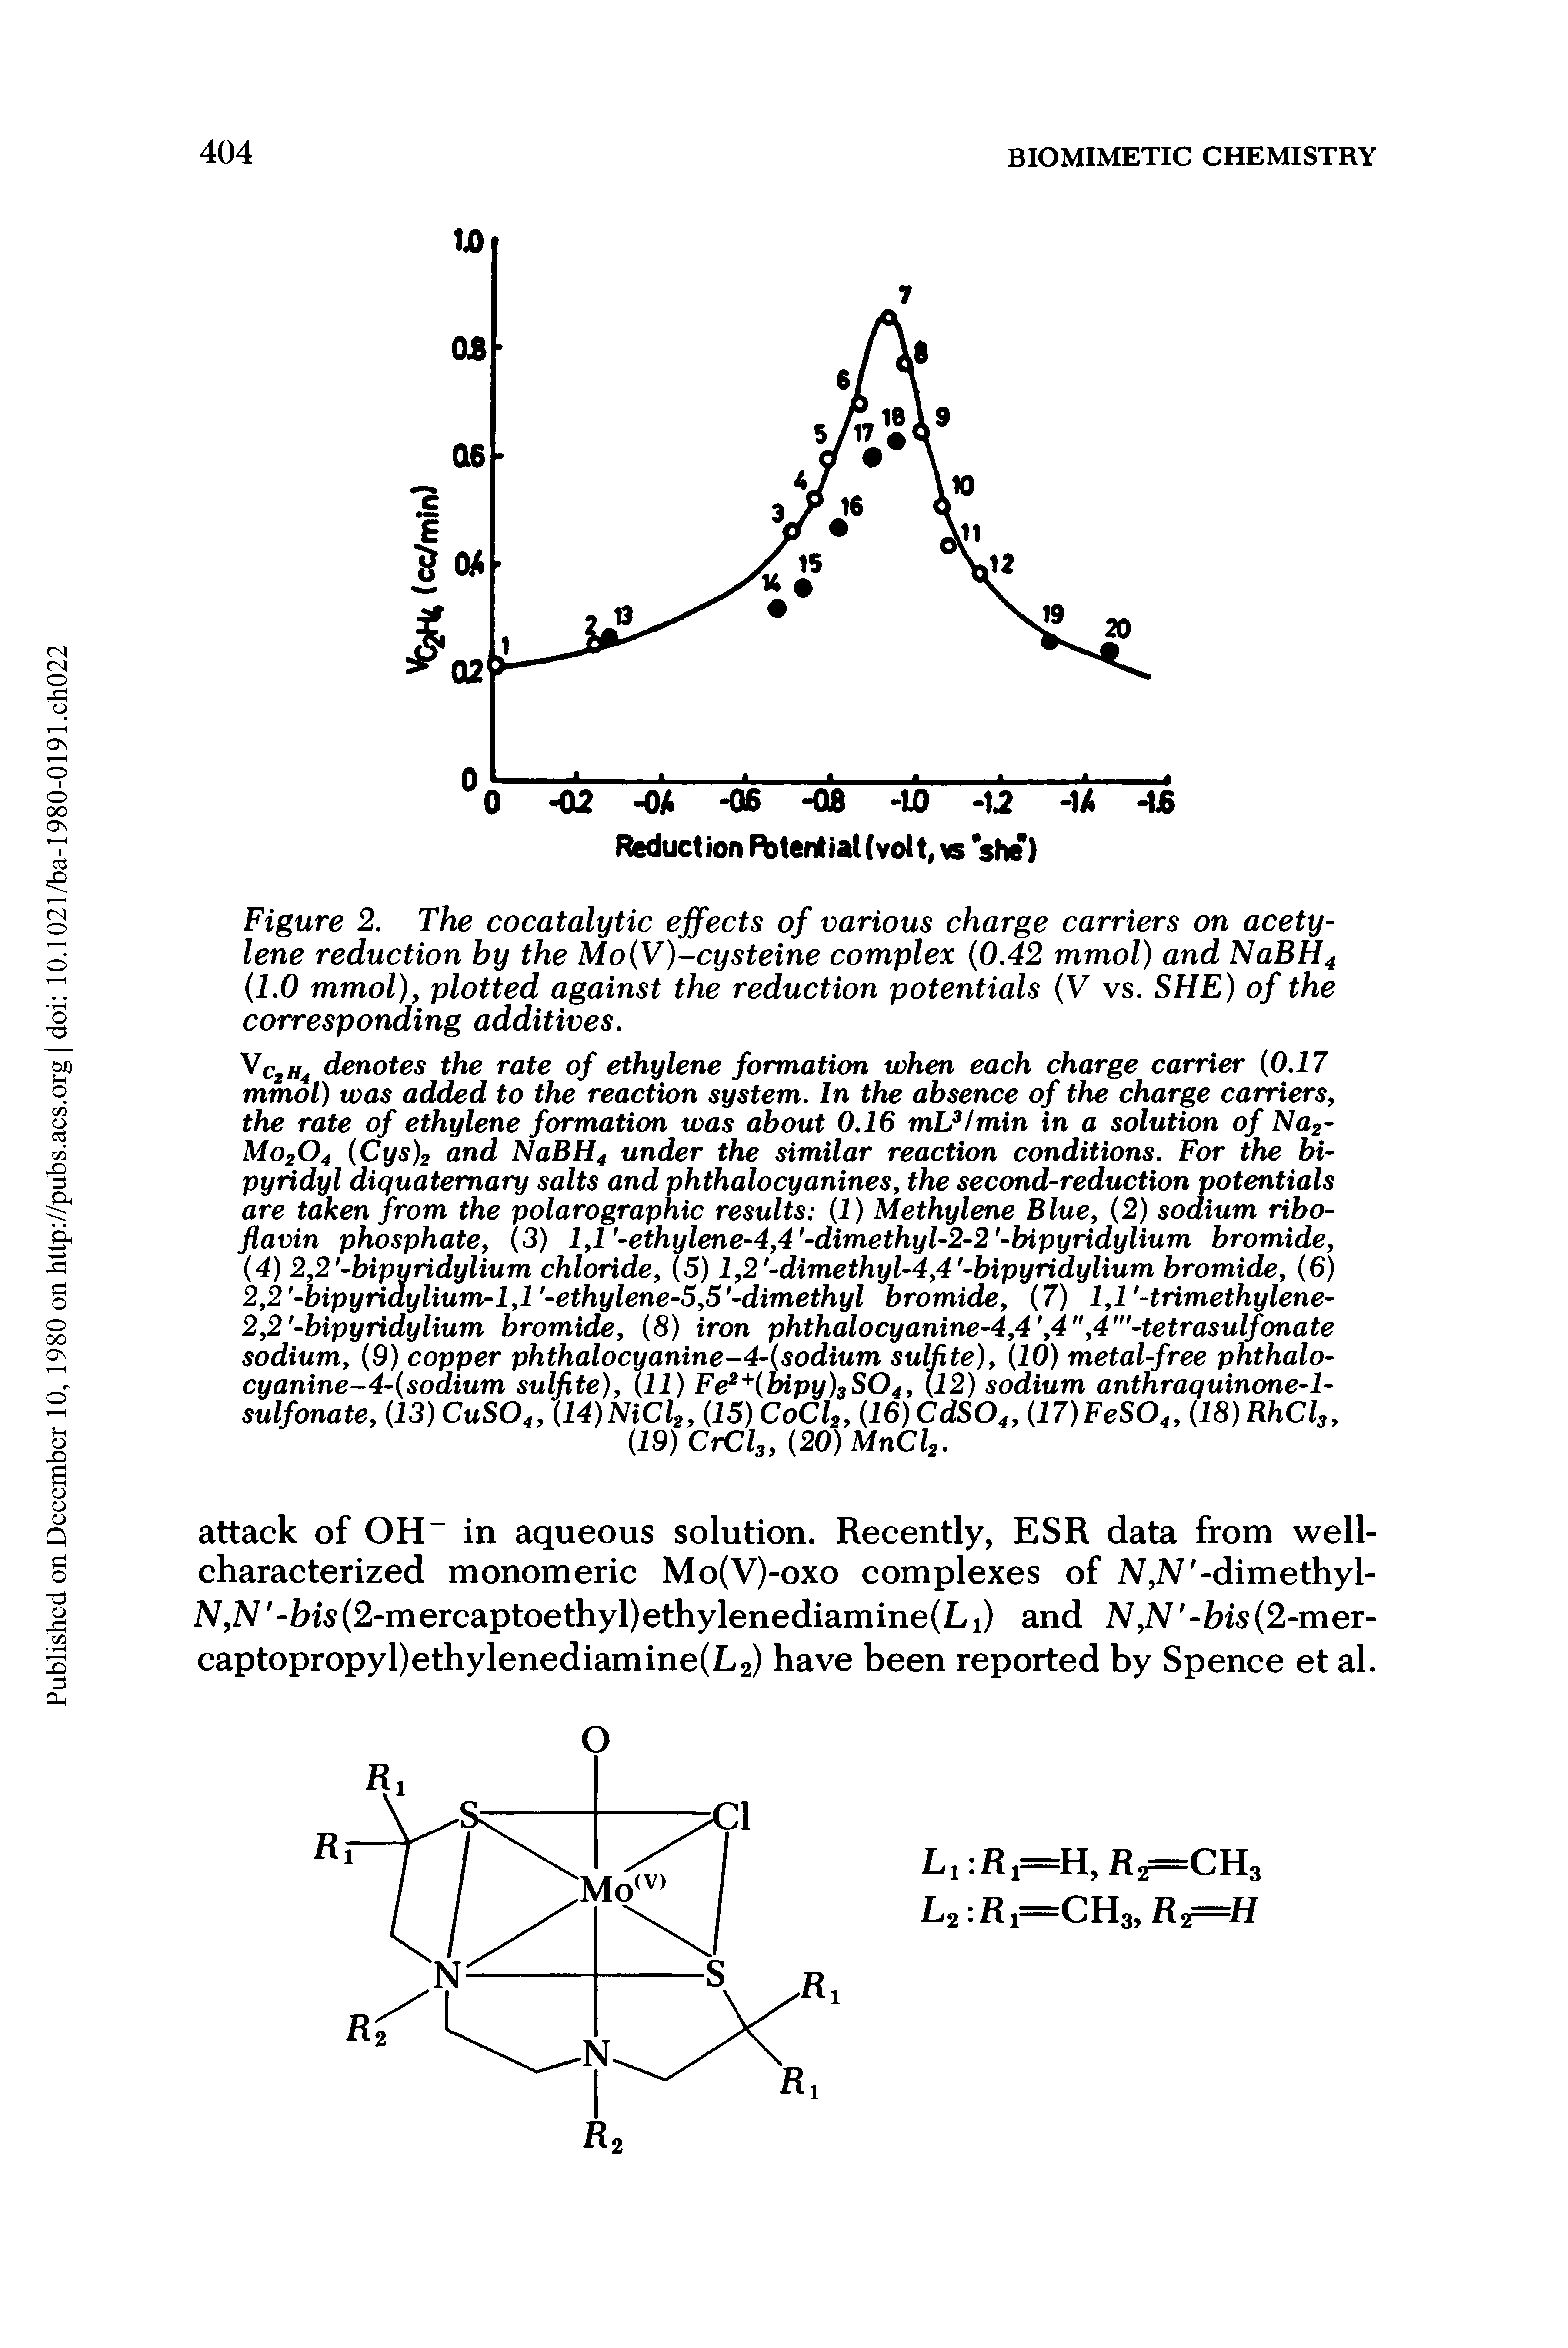 Figure 2. The cocatalytic effects of various charge carriers on acetylene reduction by the Mo(V)-cysteine complex (0.42 mmol) and NaBH4 (1.0 mmol), plotted against the reduction potentials (V vs. SHE) of the corresponding additives.